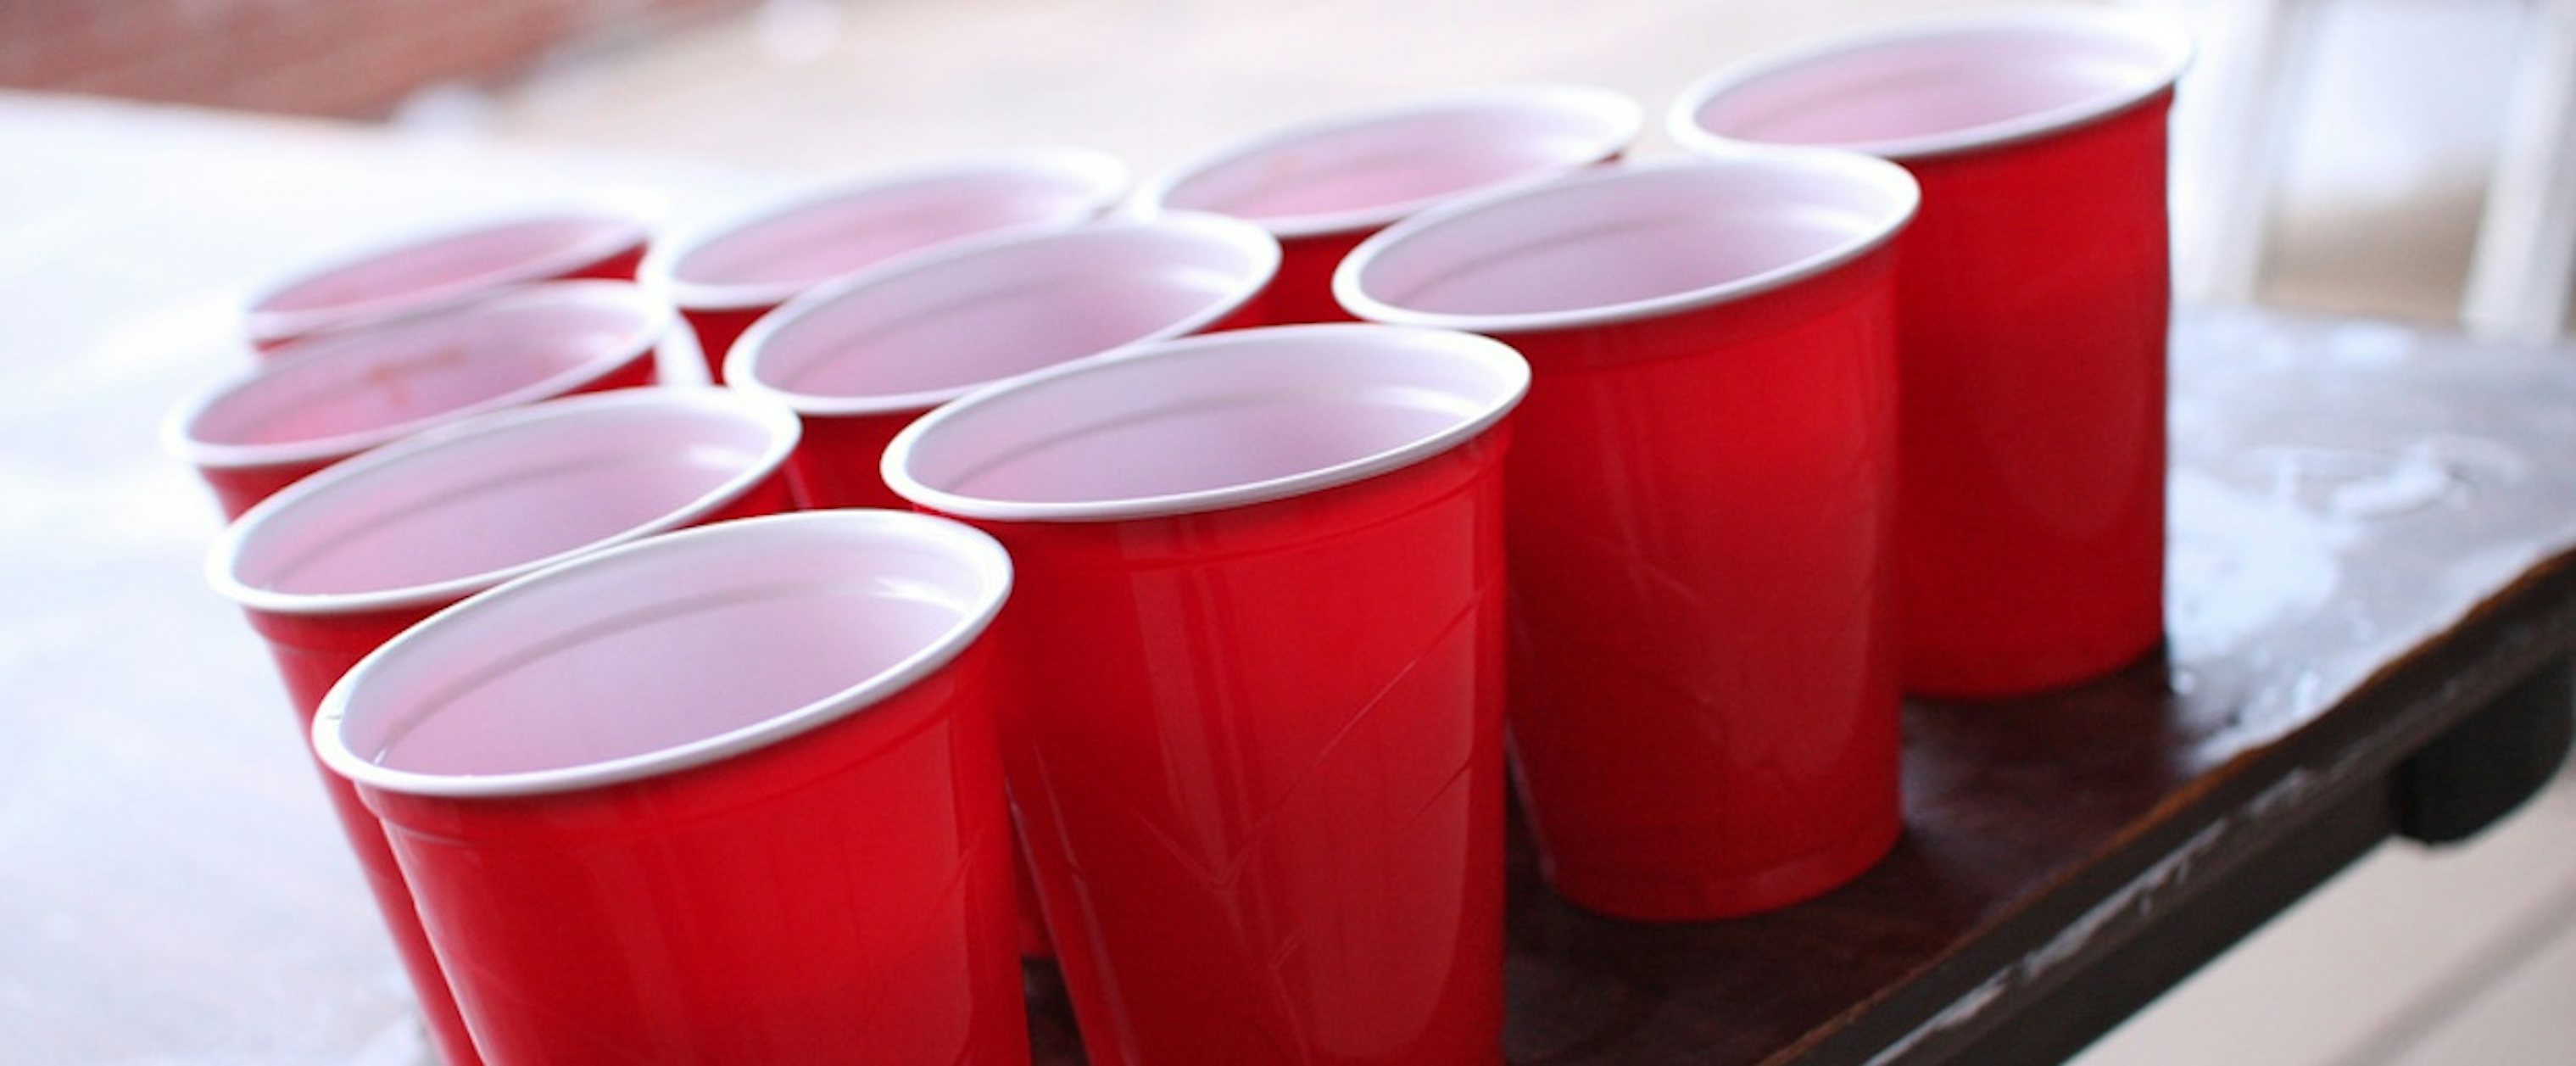 Red Solo Cup Becomes a Fashionable Political Football | The New Republic